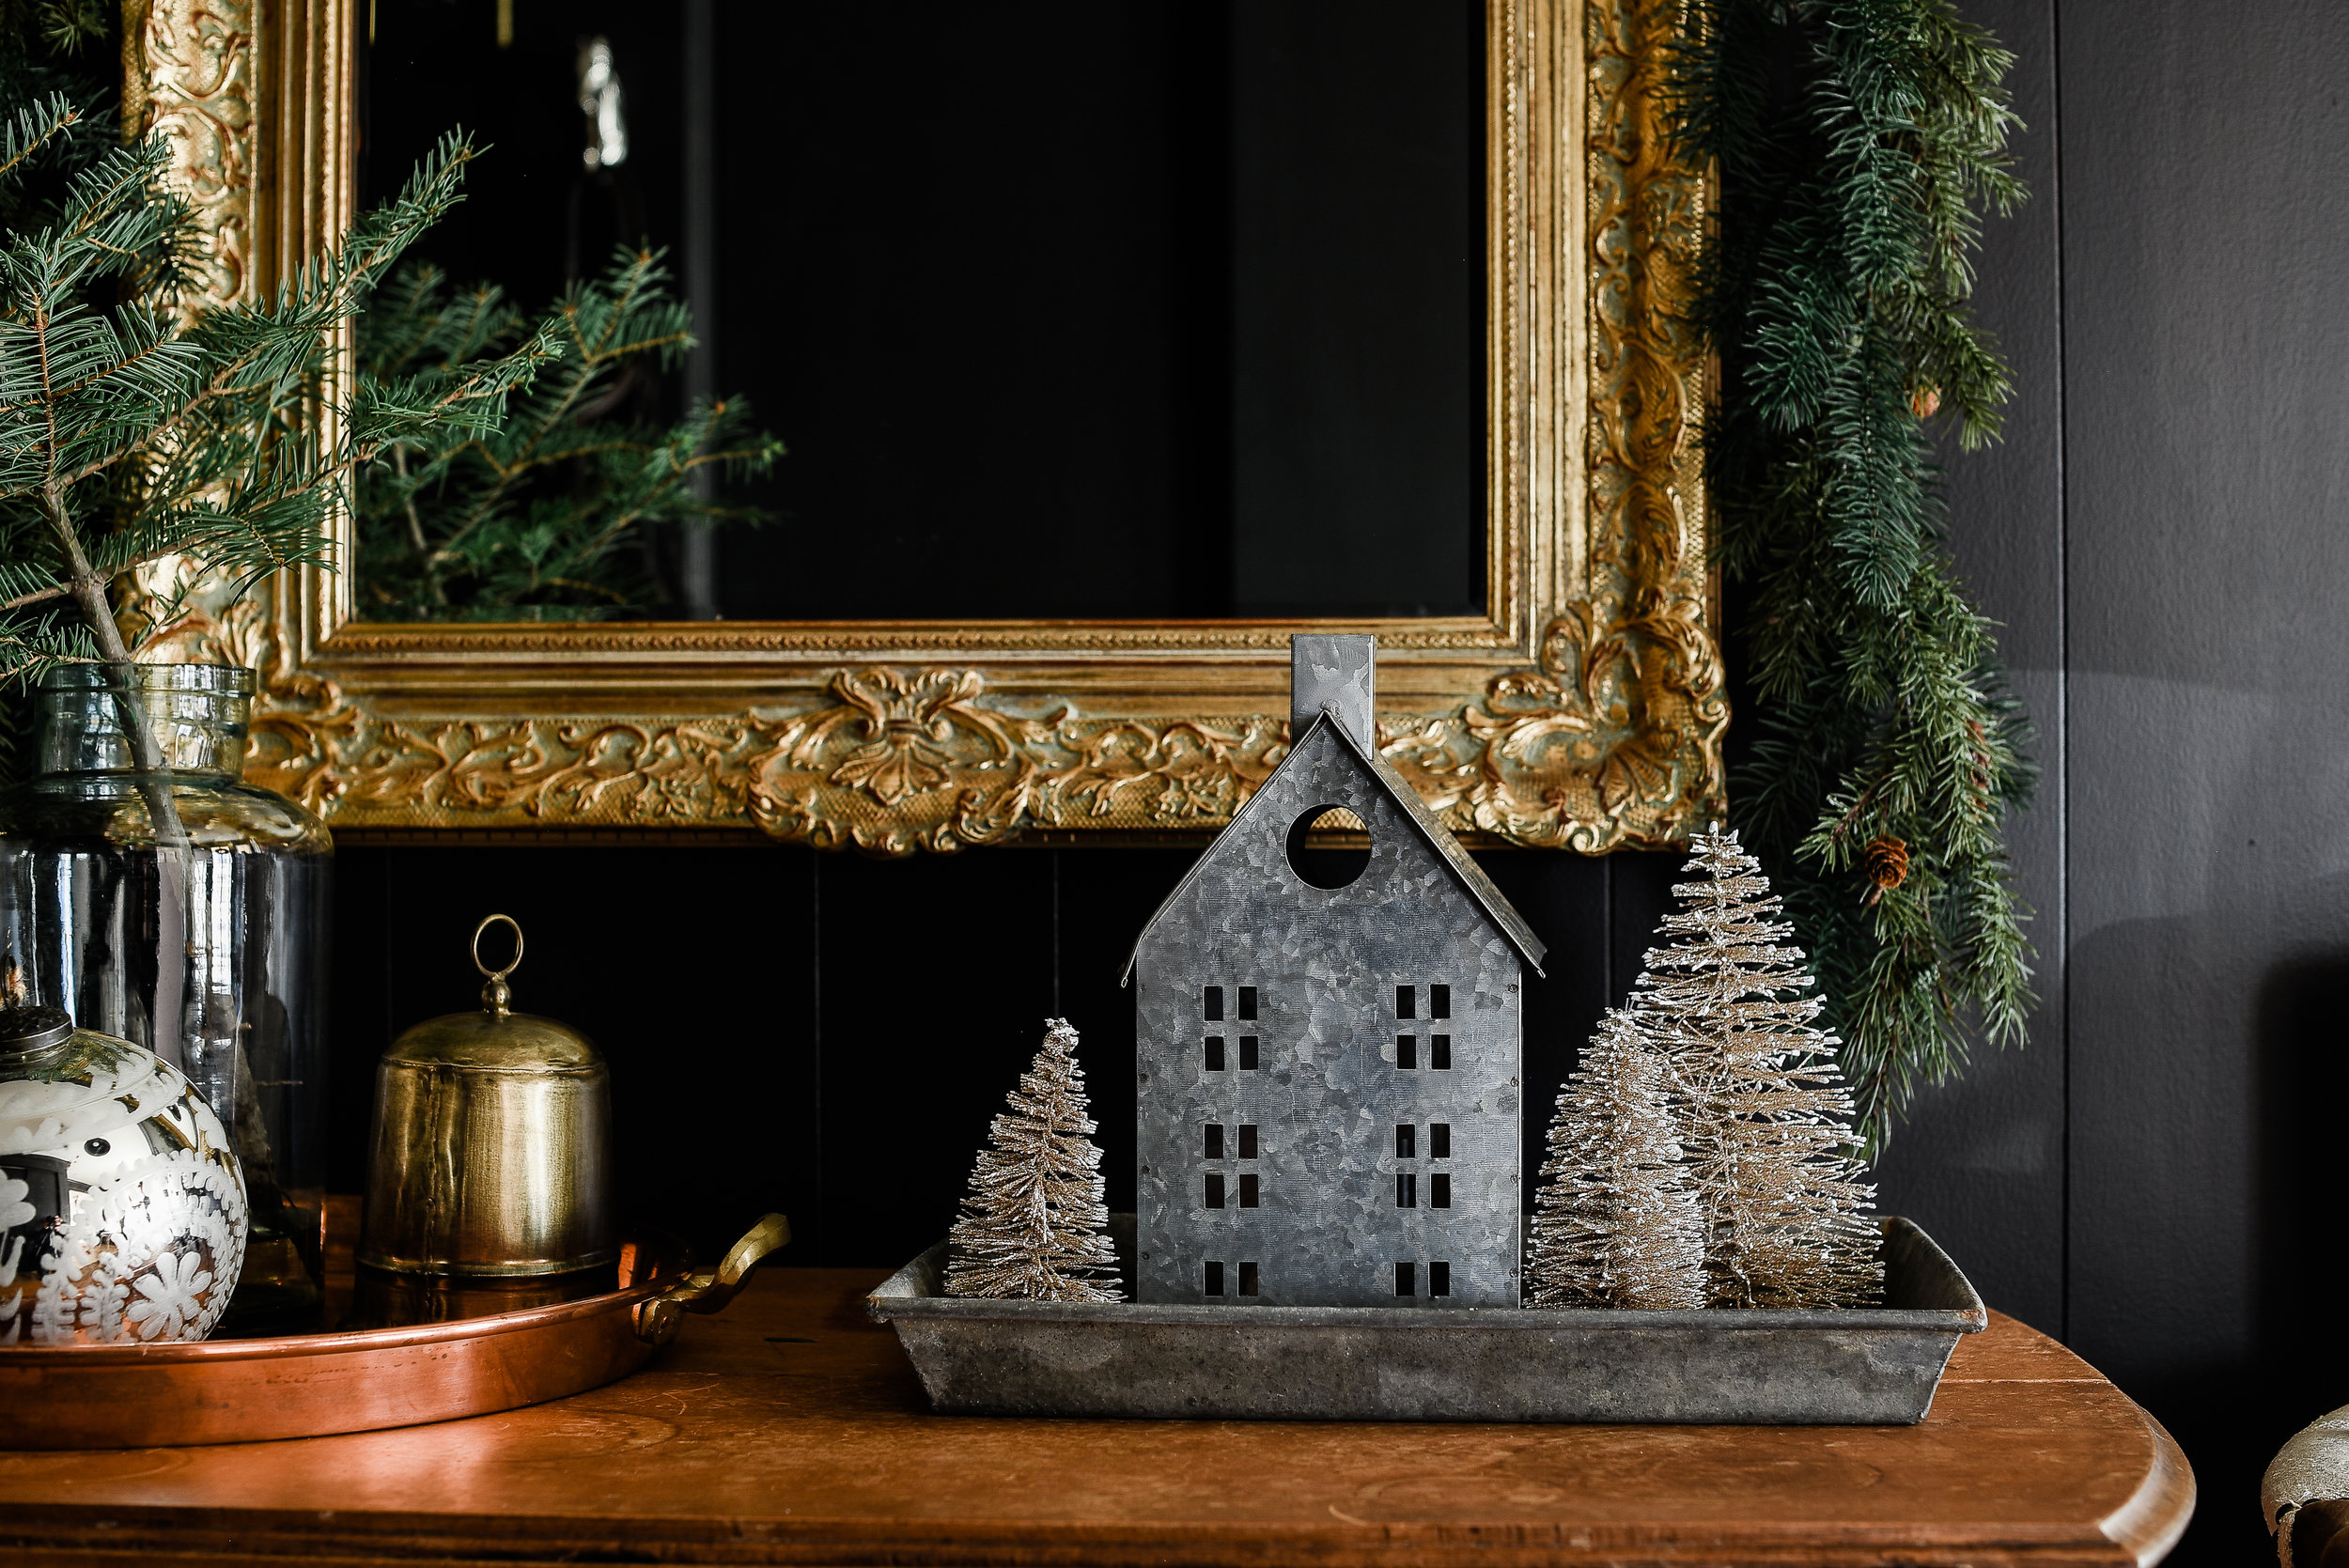 Stop by for a Christmas home tour showcasing the homes of over ten farmhouse bloggers! Get inspired this year with beautiful & unique ideas to decorate your home for Christmas!